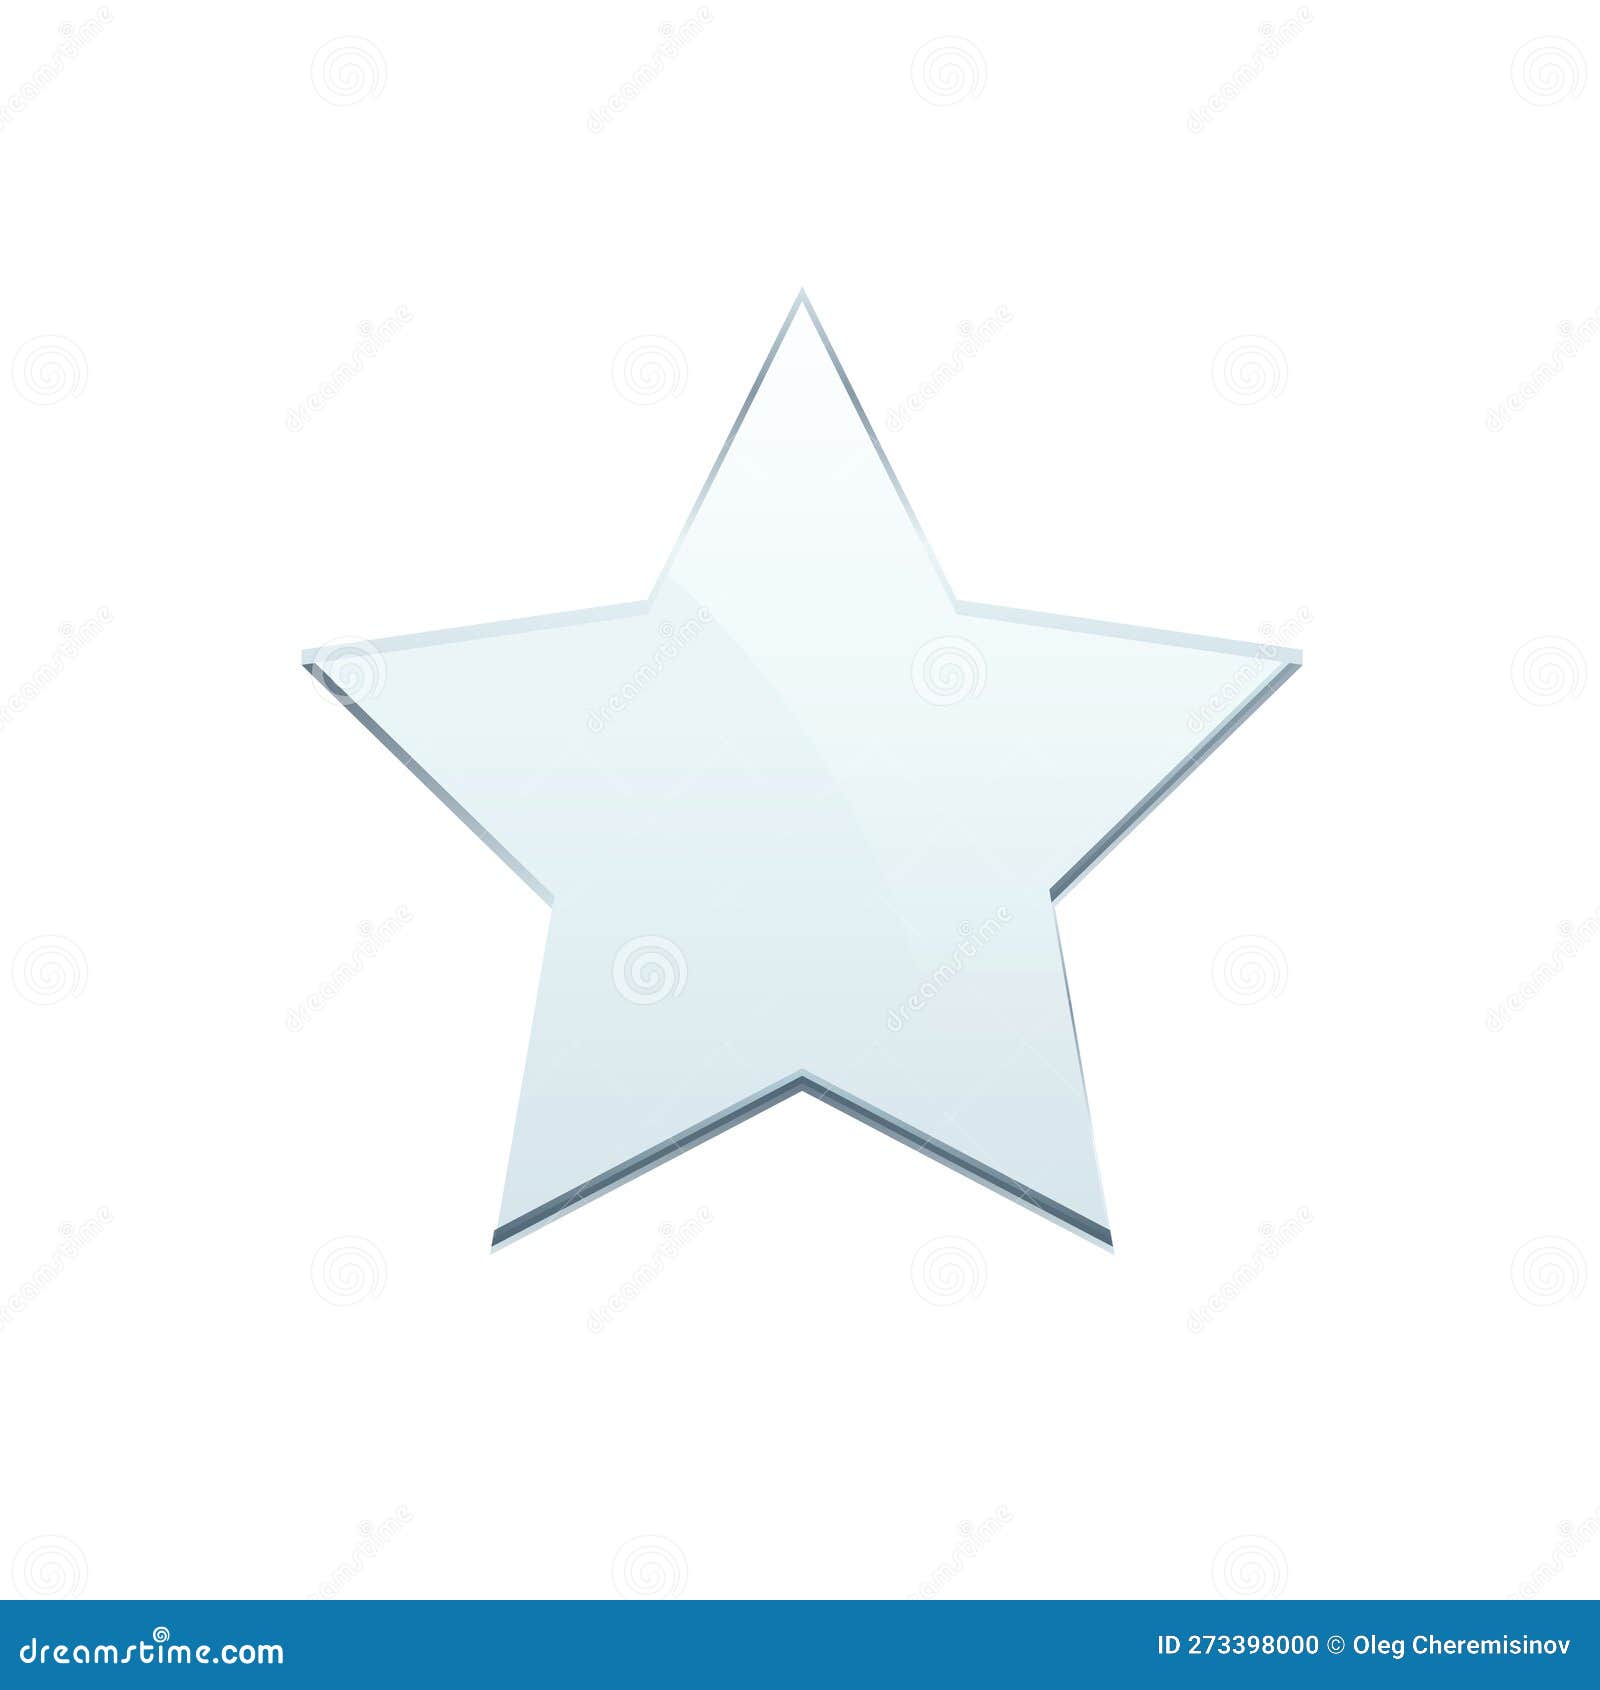 glass star, 3d realistic blank clear five point award star, transparent trophy prize